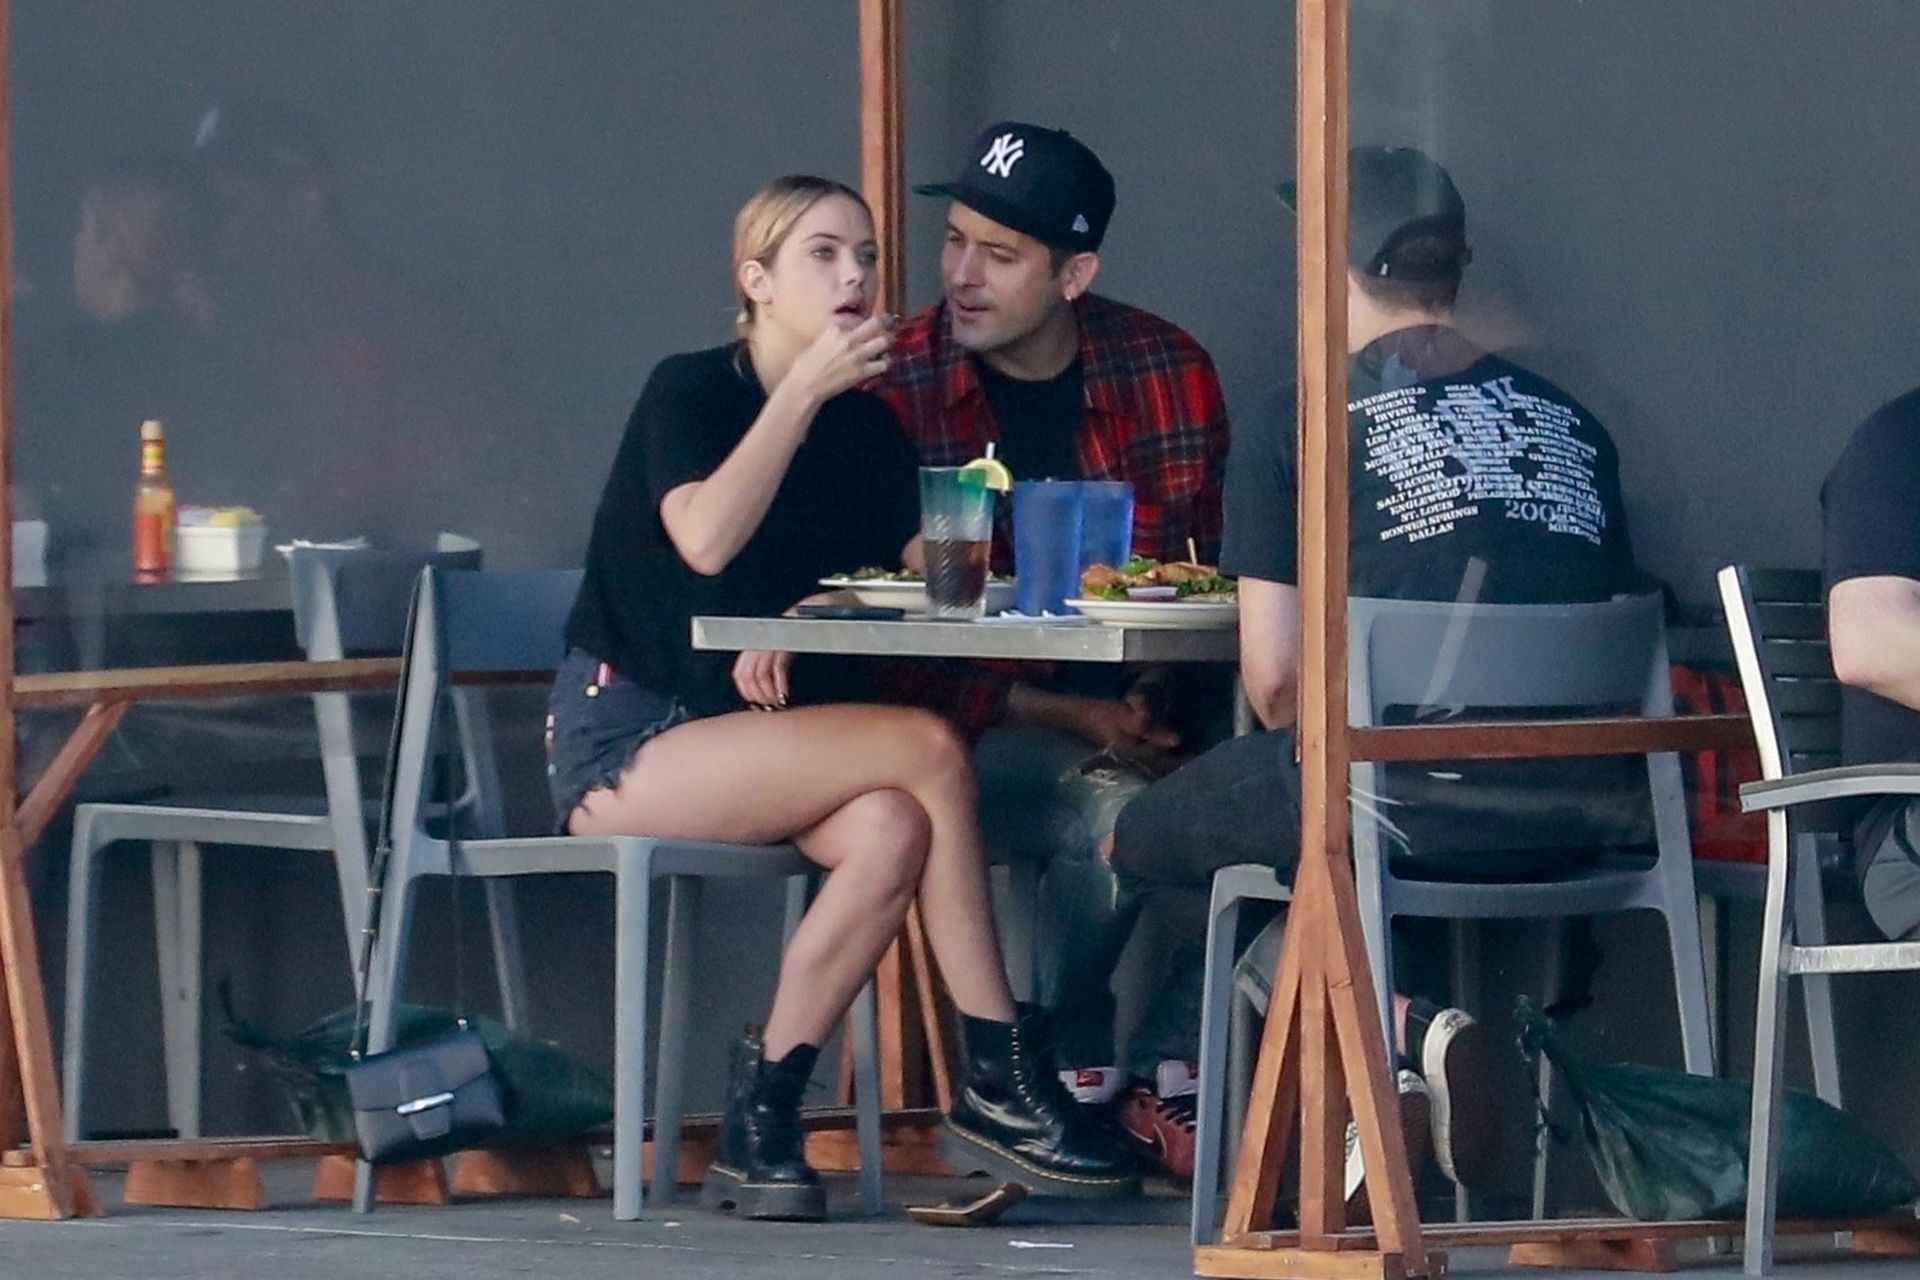 Ashley Benson & G-Eazy
Have Lunch with a Friend in LA (62 Photos)